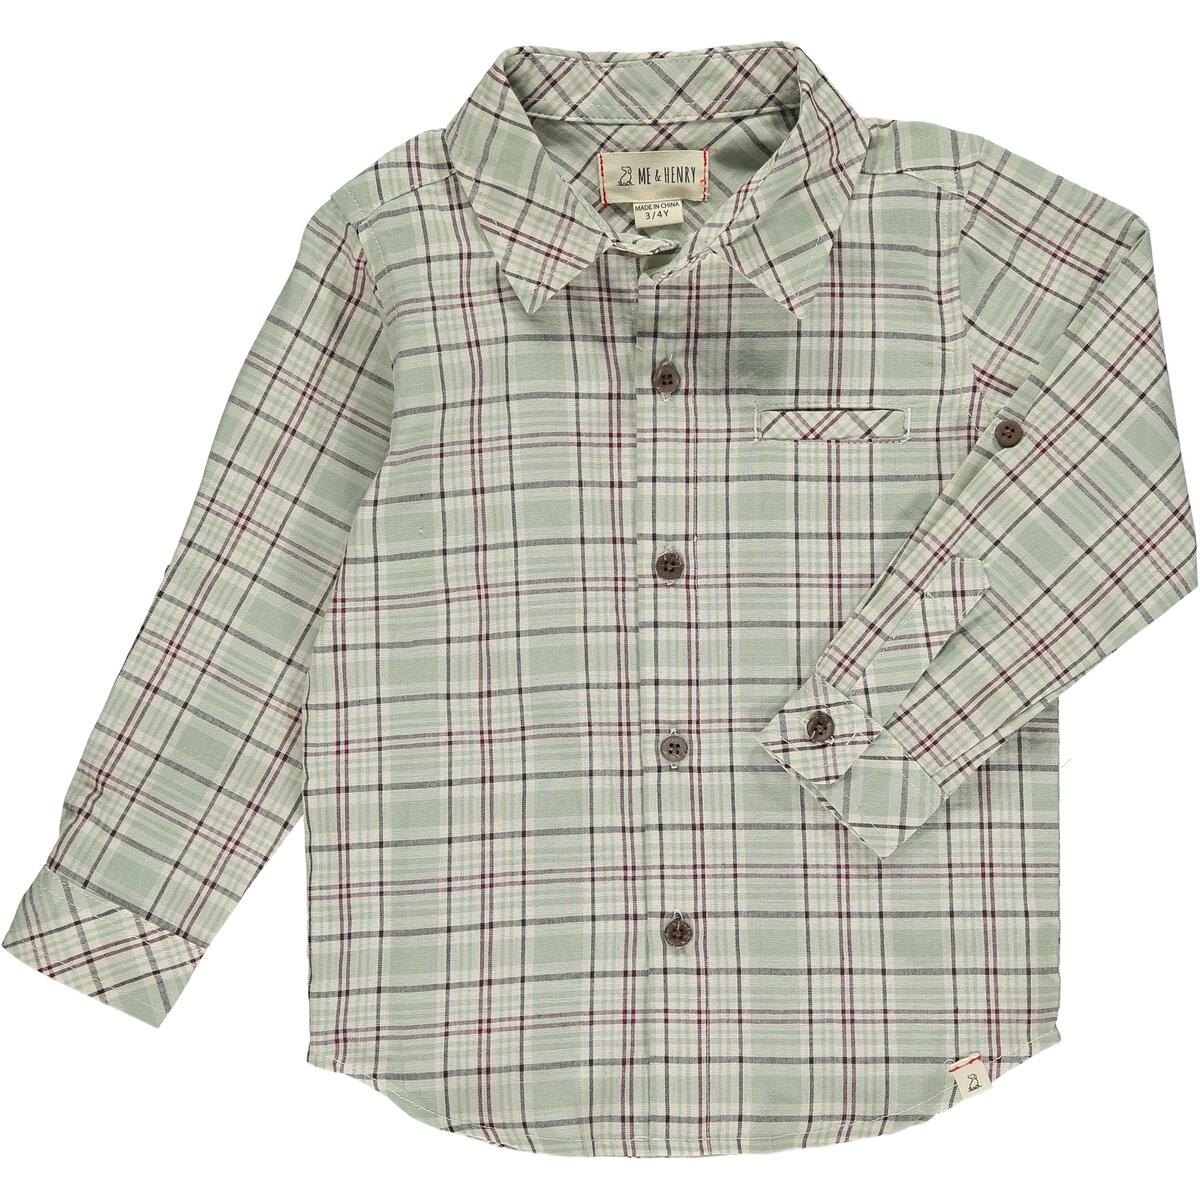 Me & Henry Atwood Woven Button Shirt - Green Plaid/Navy Stripe-ME & HENRY-Little Giant Kidz